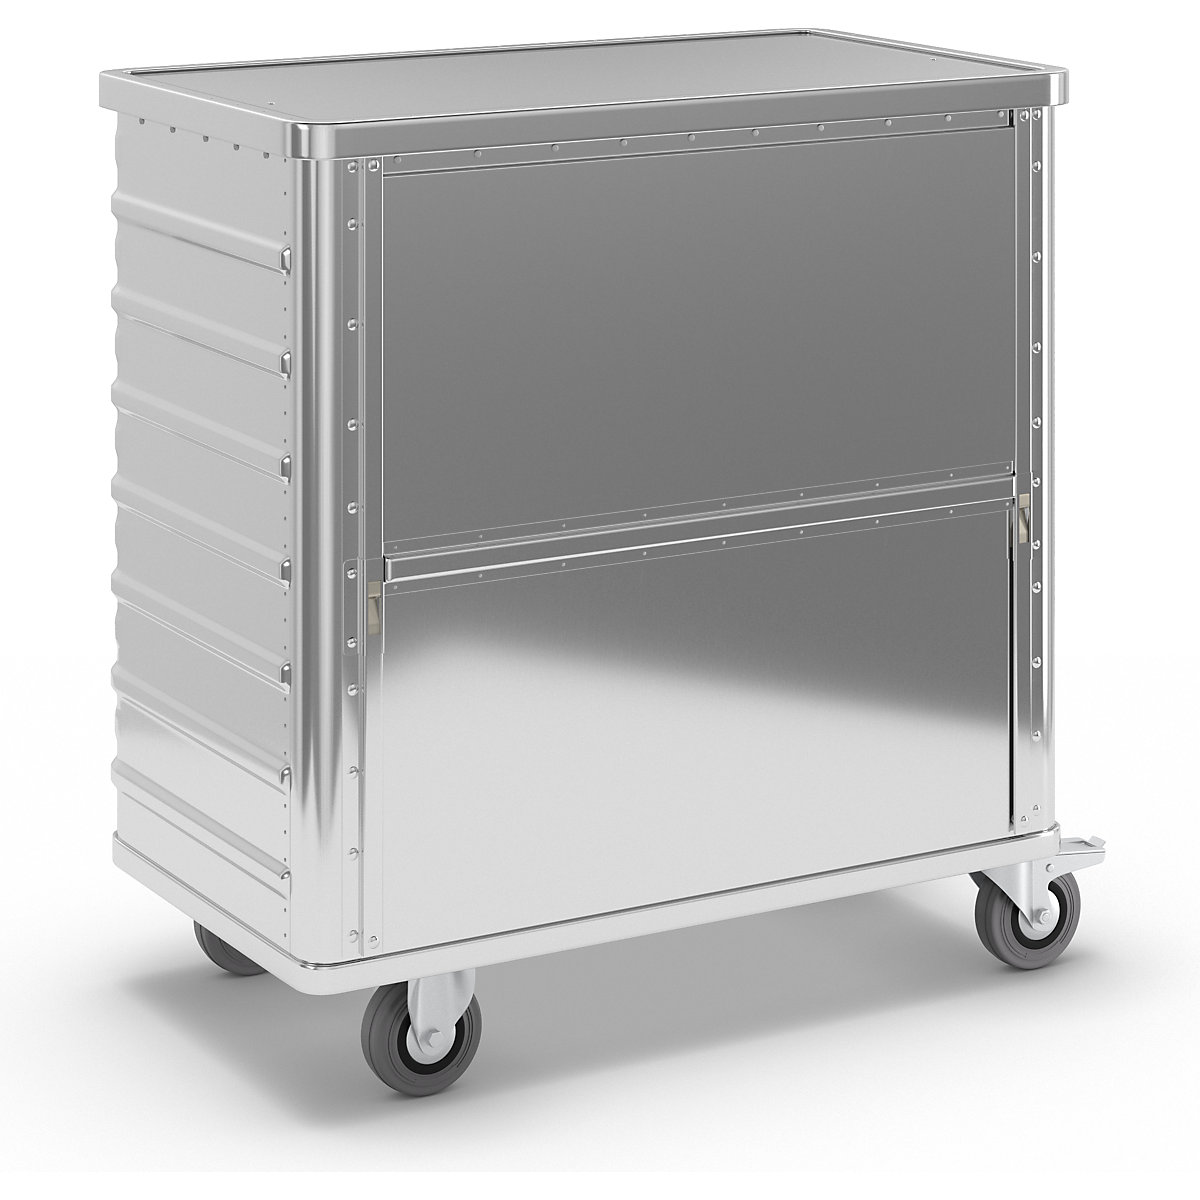 Aluminium container truck, fold down side panel – Gmöhling